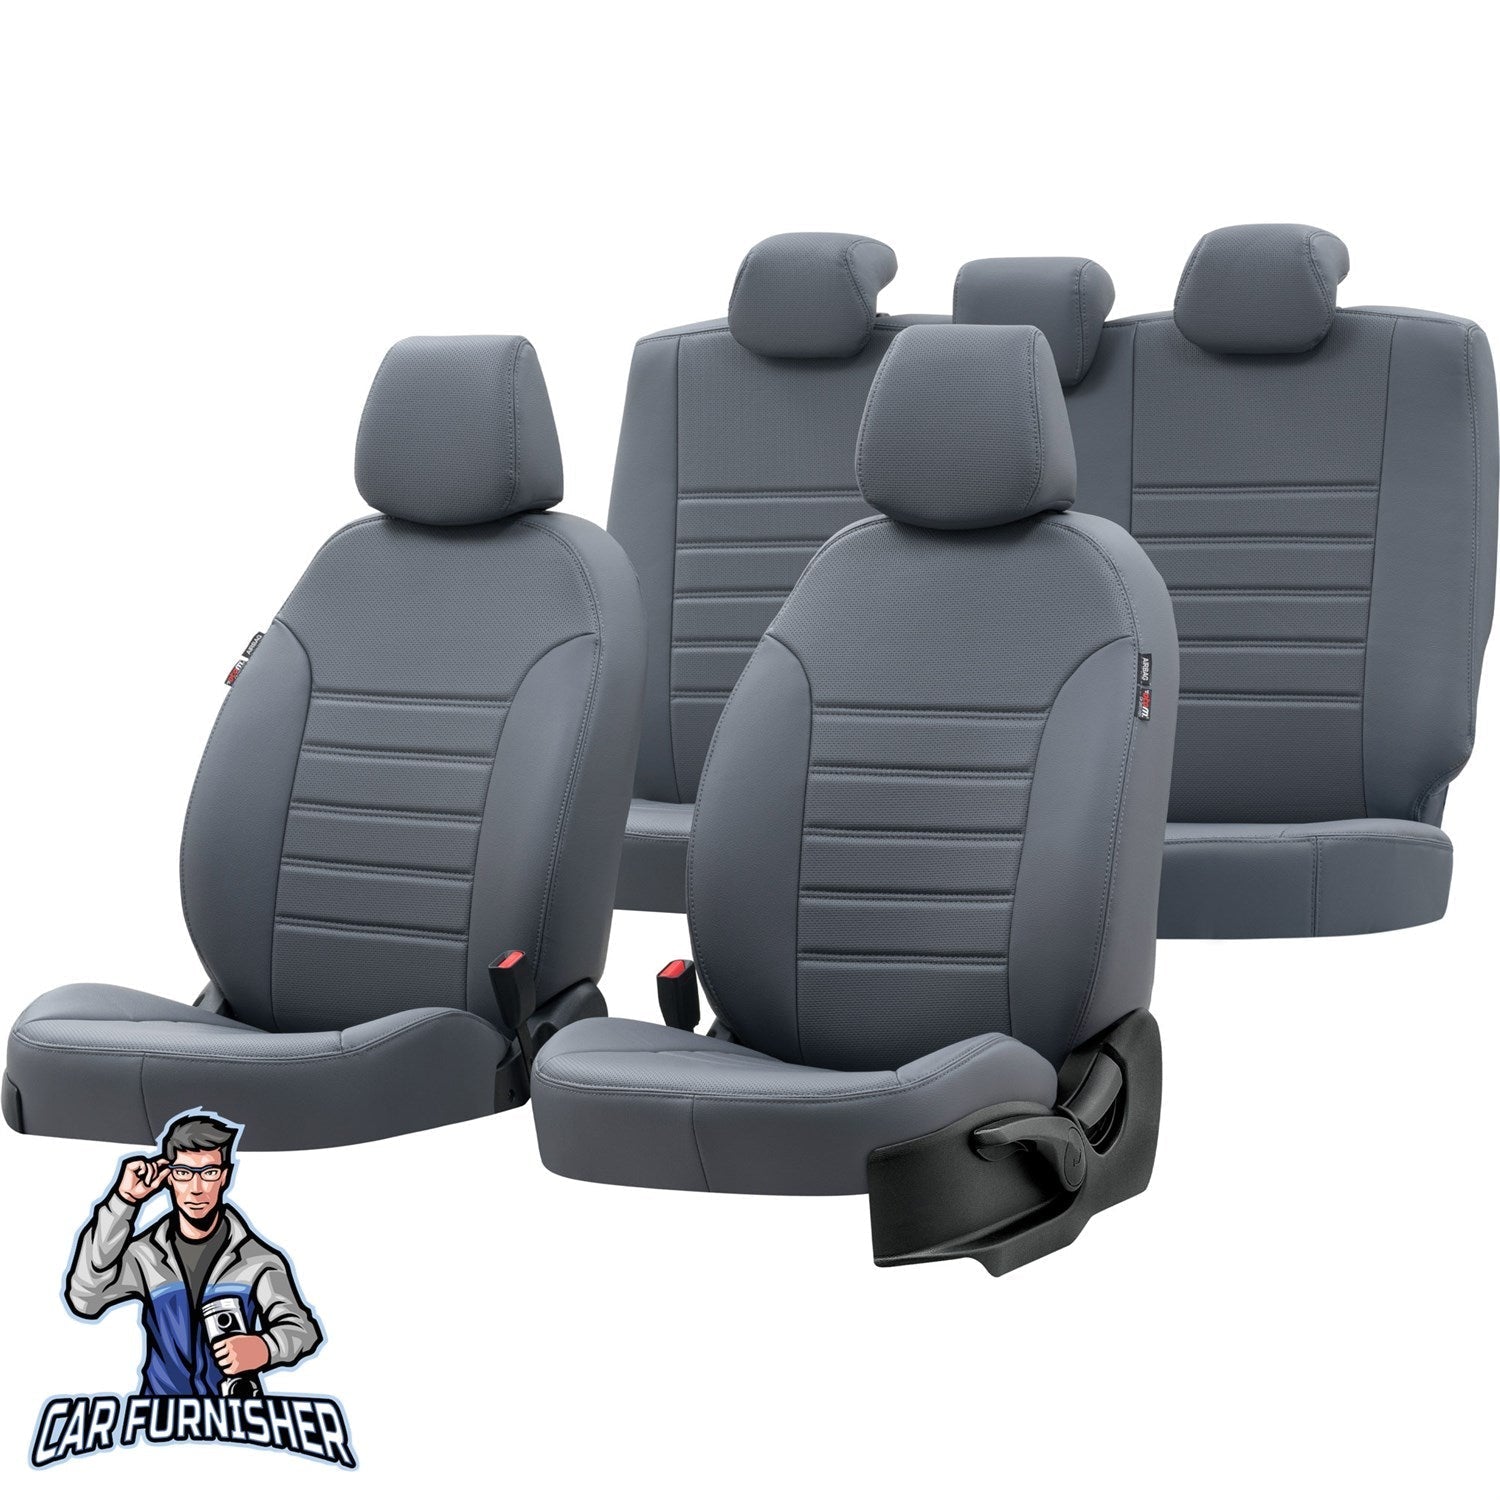 Volkswagen Caravelle Seat Cover New York Leather Design Smoked Leather